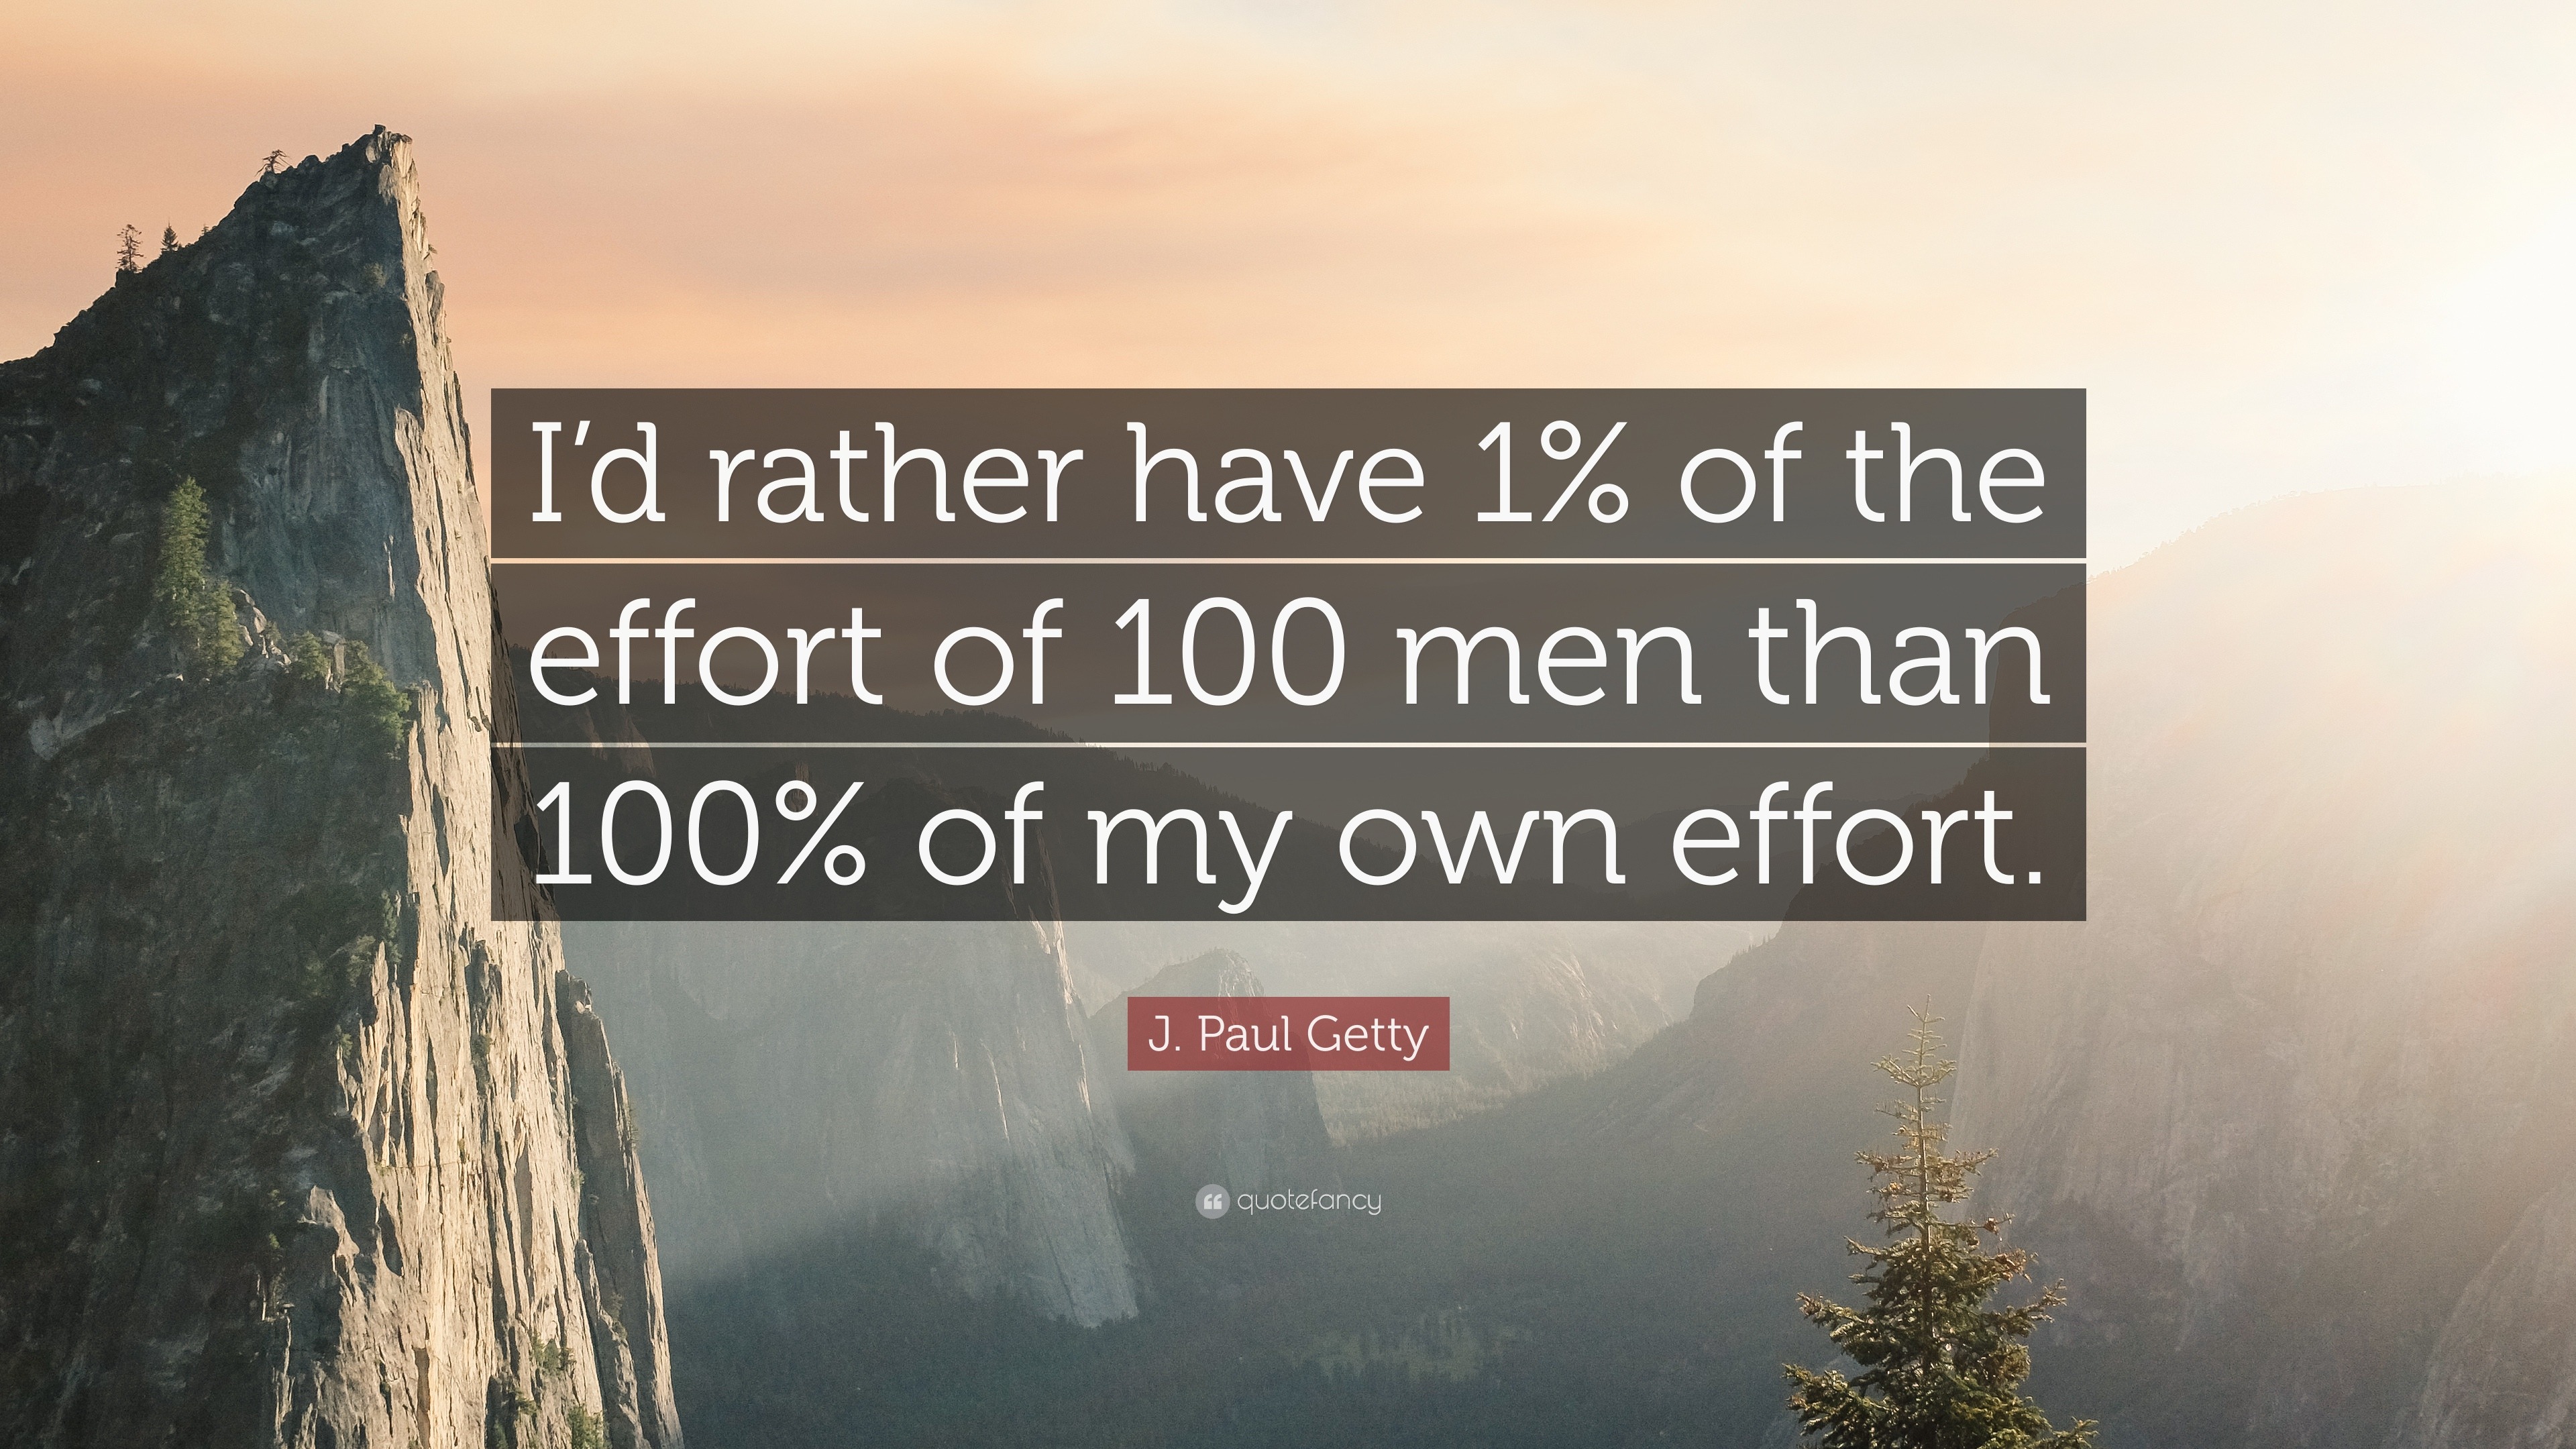 J. Paul Getty Quote: “I’d rather have 1% of the effort of 100 men than